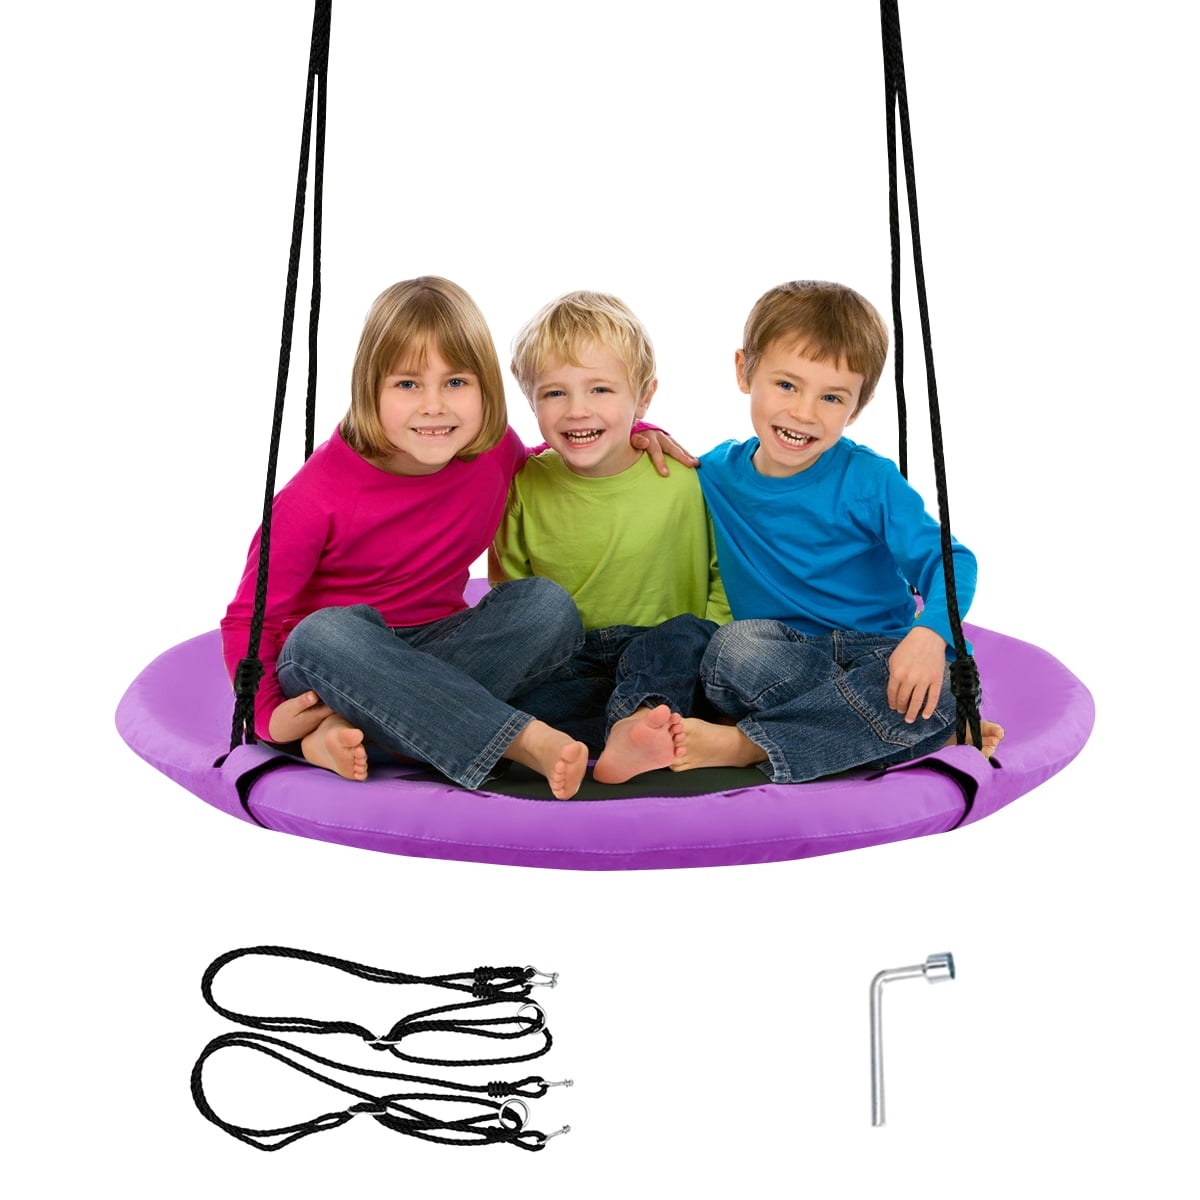 Details about   Giant 40" Disc Swing Seat Flying Saucer Tree Web Swing Playground Backyard Black 